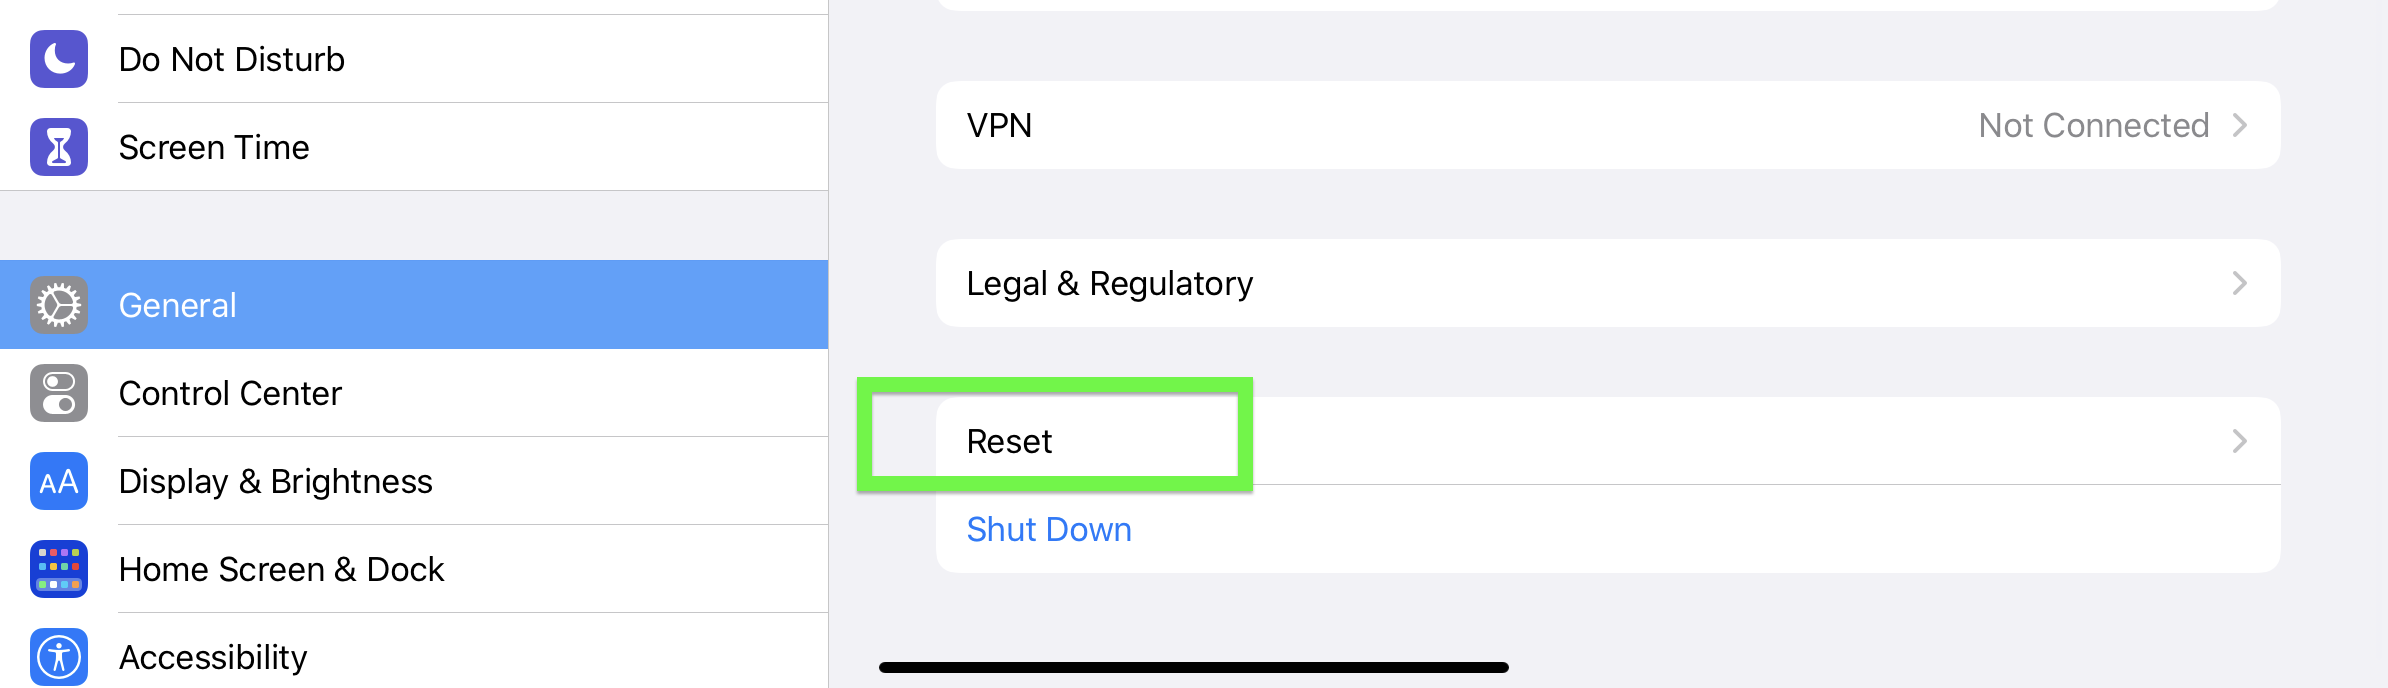 reset - how to reset ipad step by step instructions